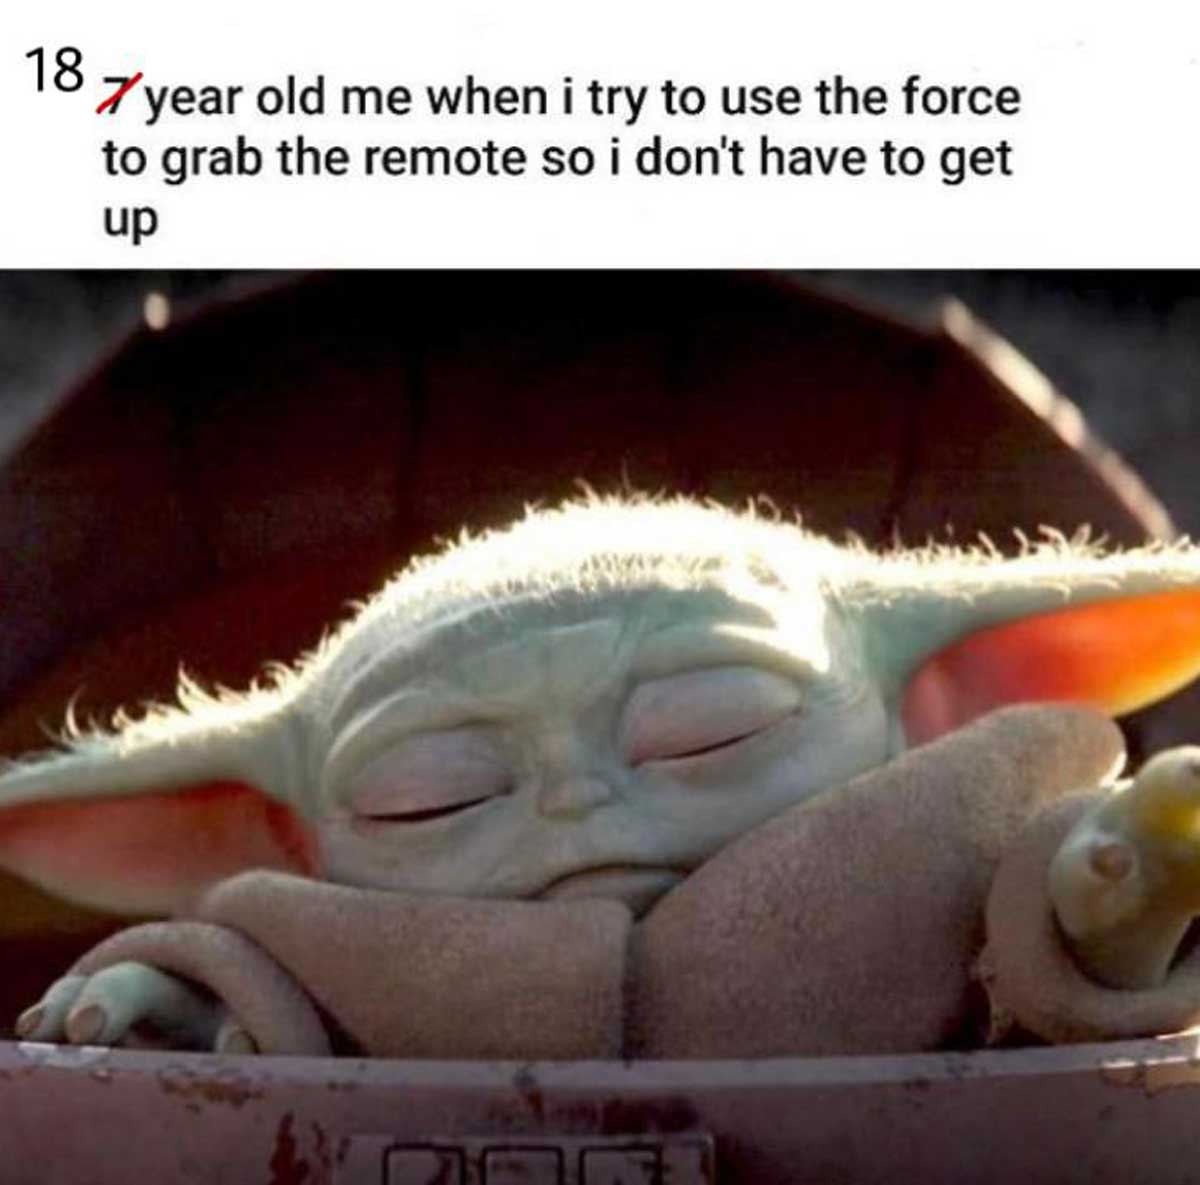 photo caption - 18 7 year old me when i try to use the force to grab the remote so i don't have to get up